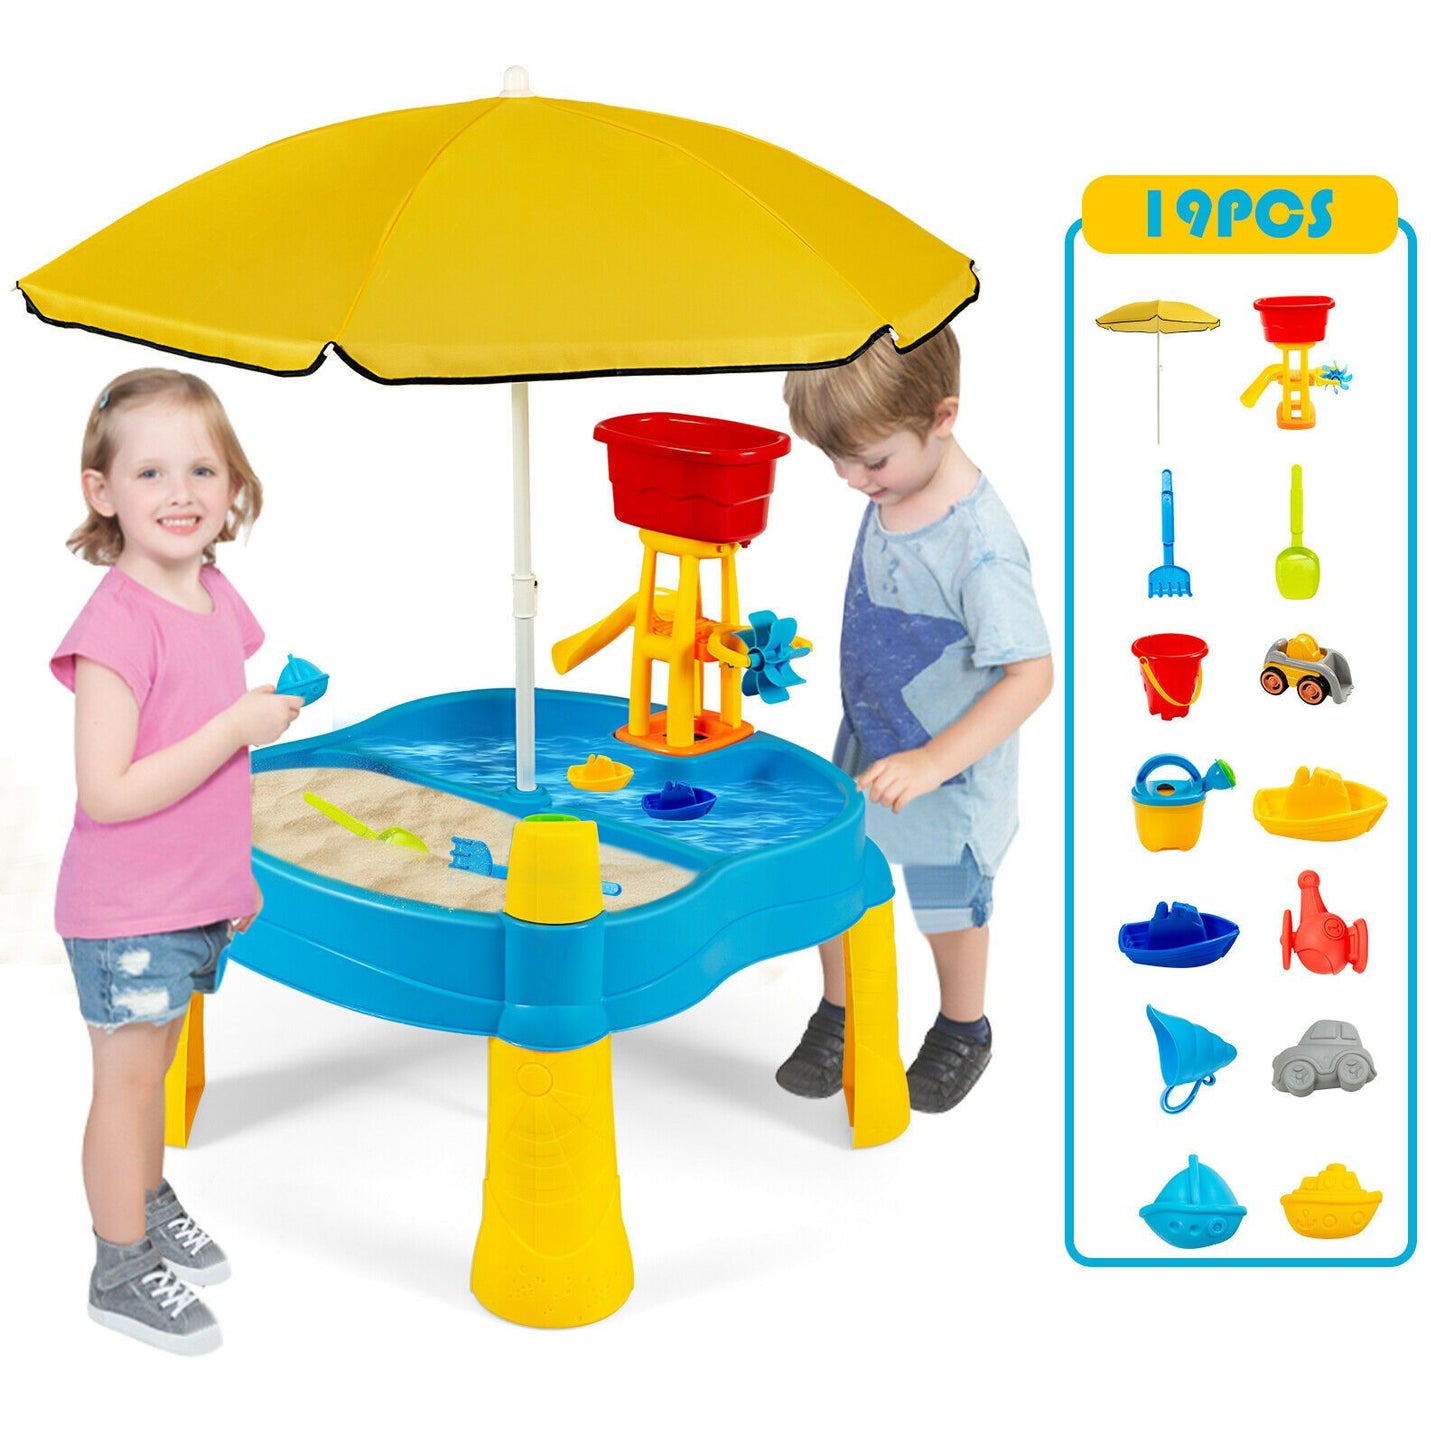 Kids Sand and Water Table Set with Umbrella